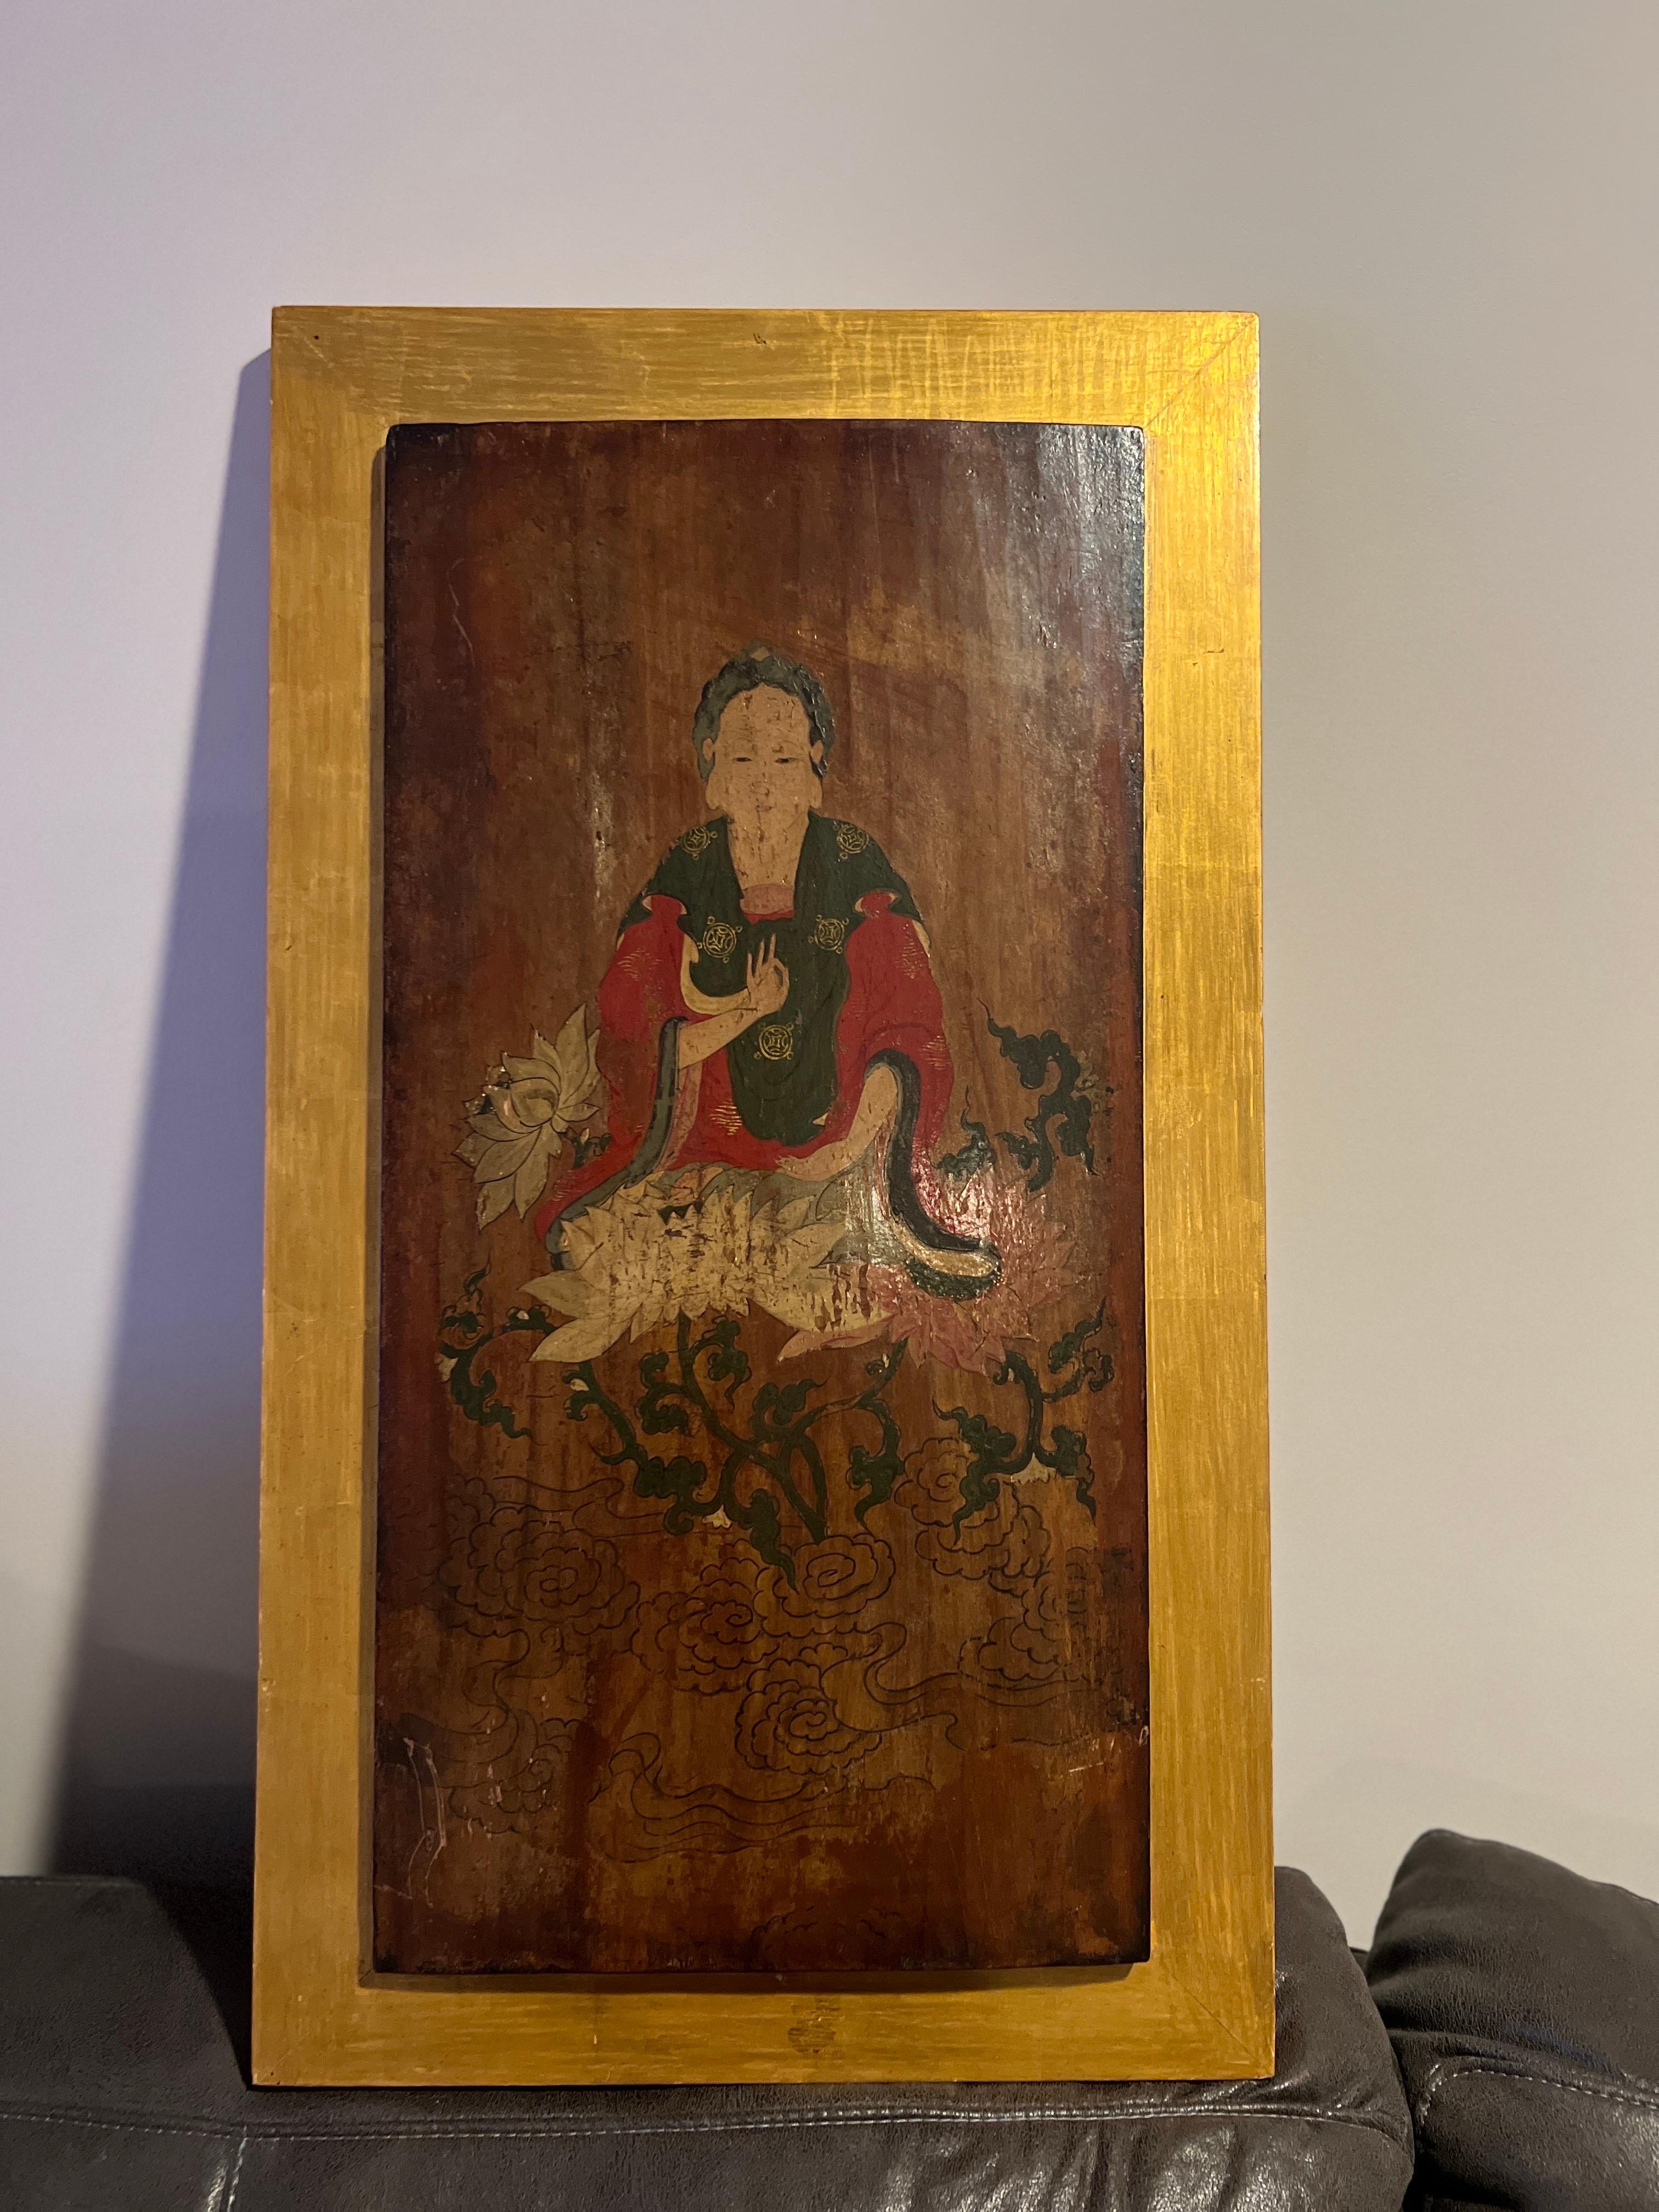 Possibly Chinese or Tibetan, I believe this piece is 18th century but it might even be earlier. 
A beautiful quality antique painted wood panel depicting Buddhist god Guanyin. The antique panel is set inside a 20th century gilt wood accent 